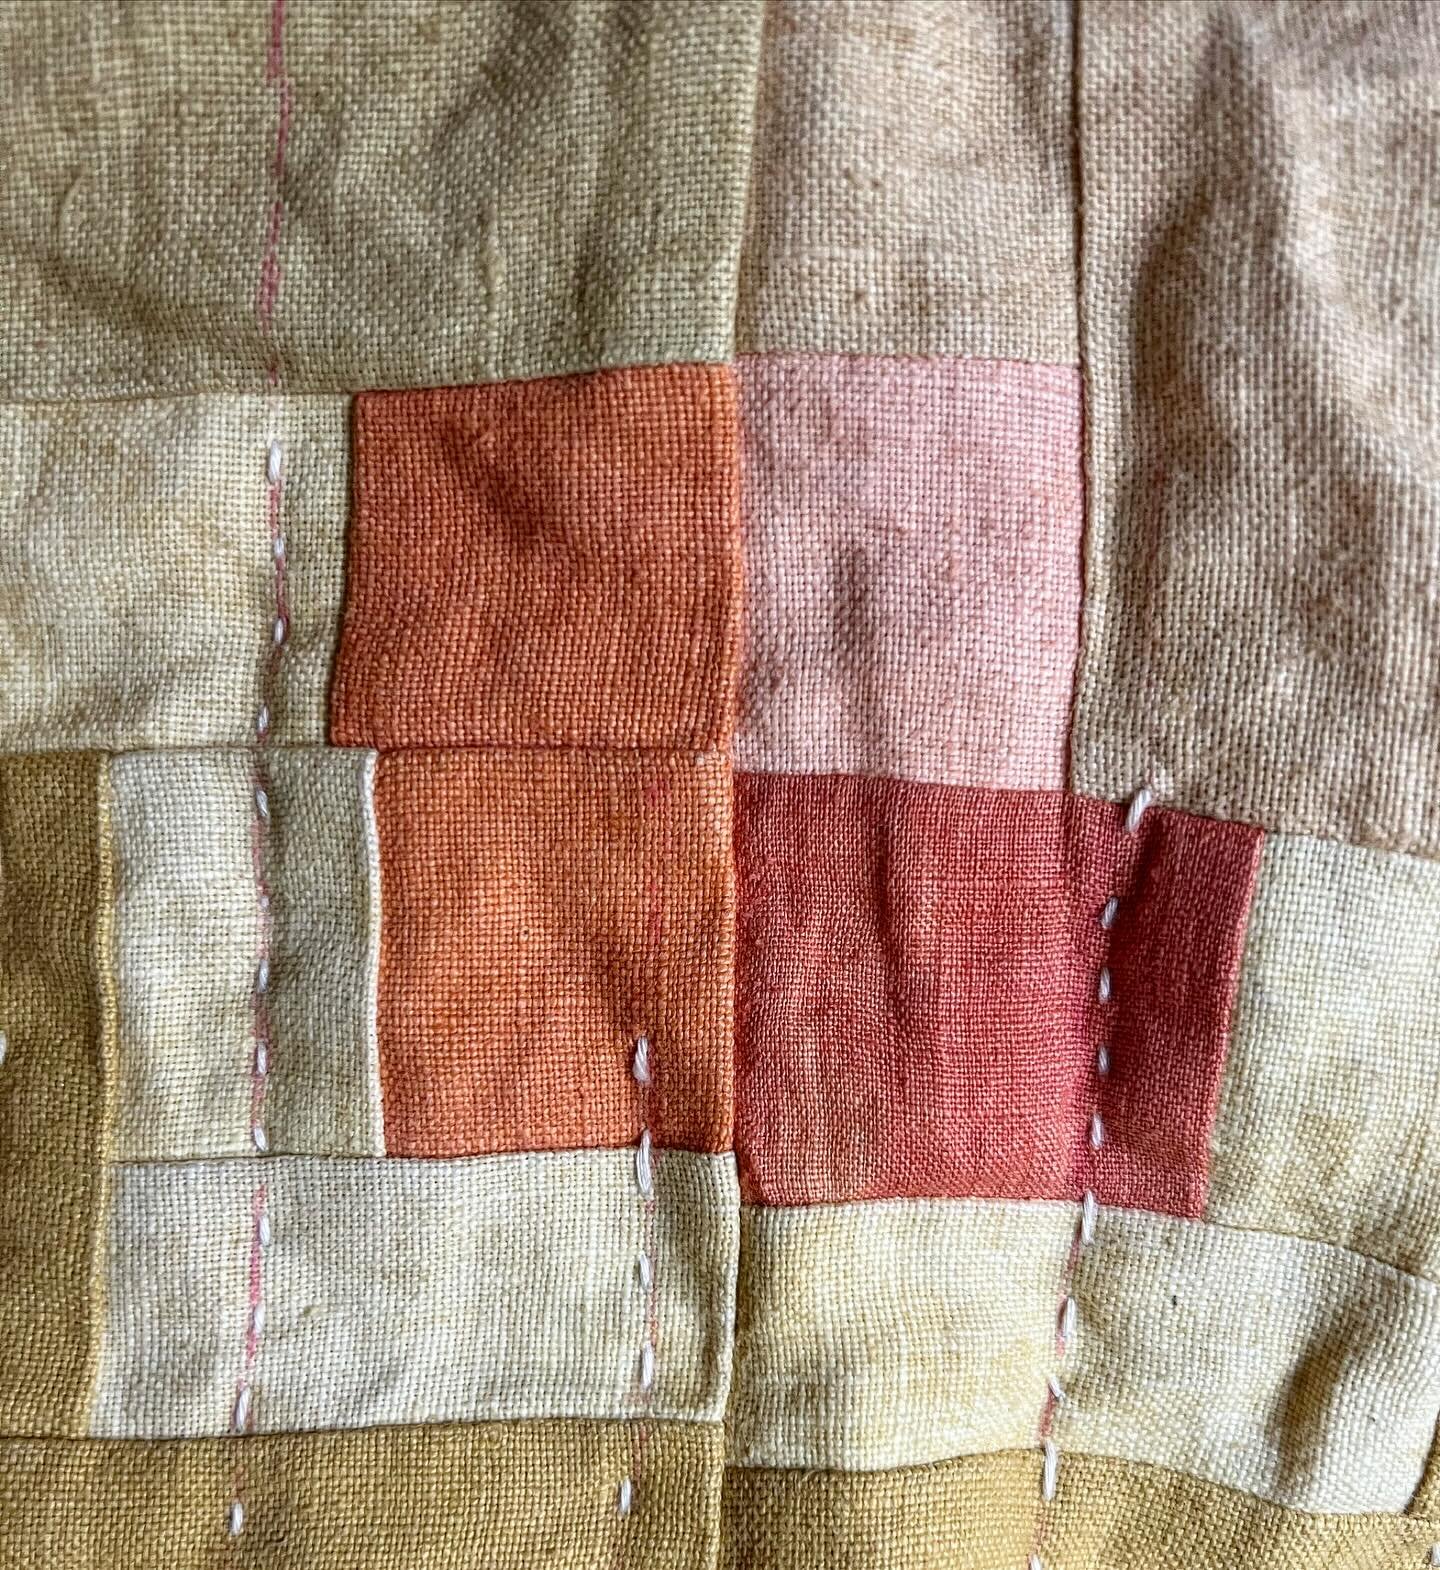 I&rsquo;ve been quilting at night in a dimly lit room and so I&rsquo;ve taken few photos lately but here is one of a lovely little spot. I have a day or two left to quilt on this one. This is a rare quilt that I don&rsquo;t have a particular plan for